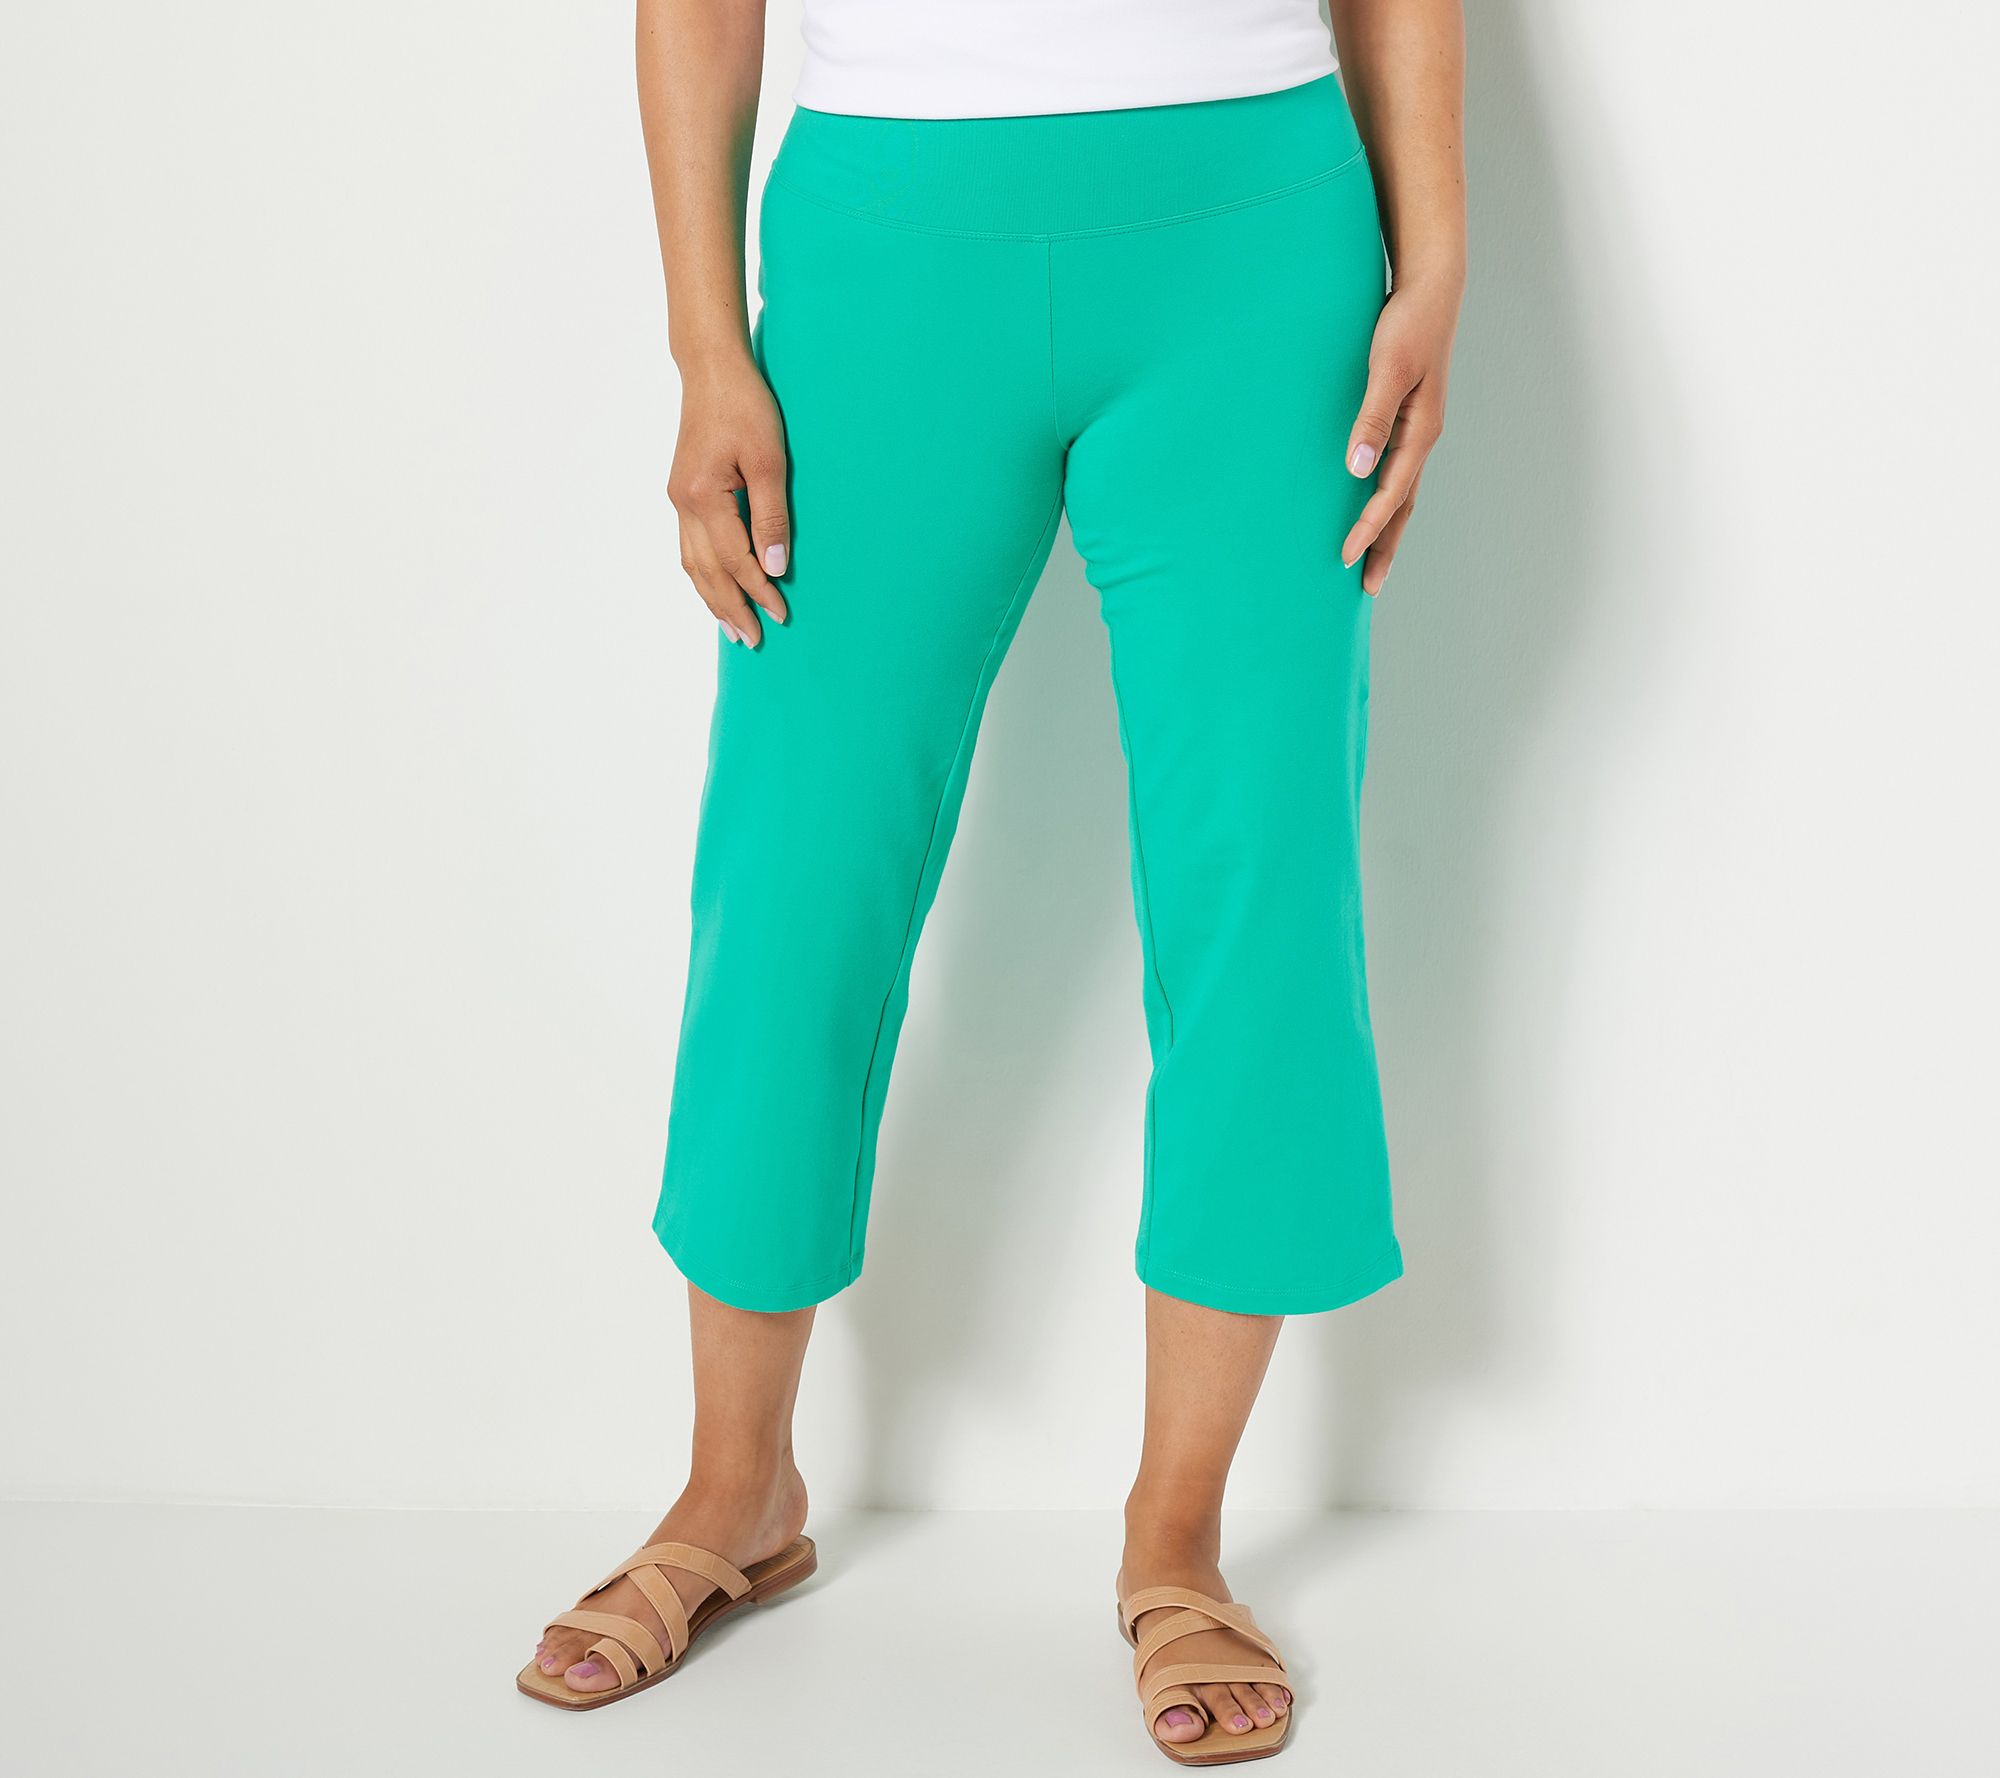 Wicked by Women with Control Regular Pull-On Capri Pants Coral